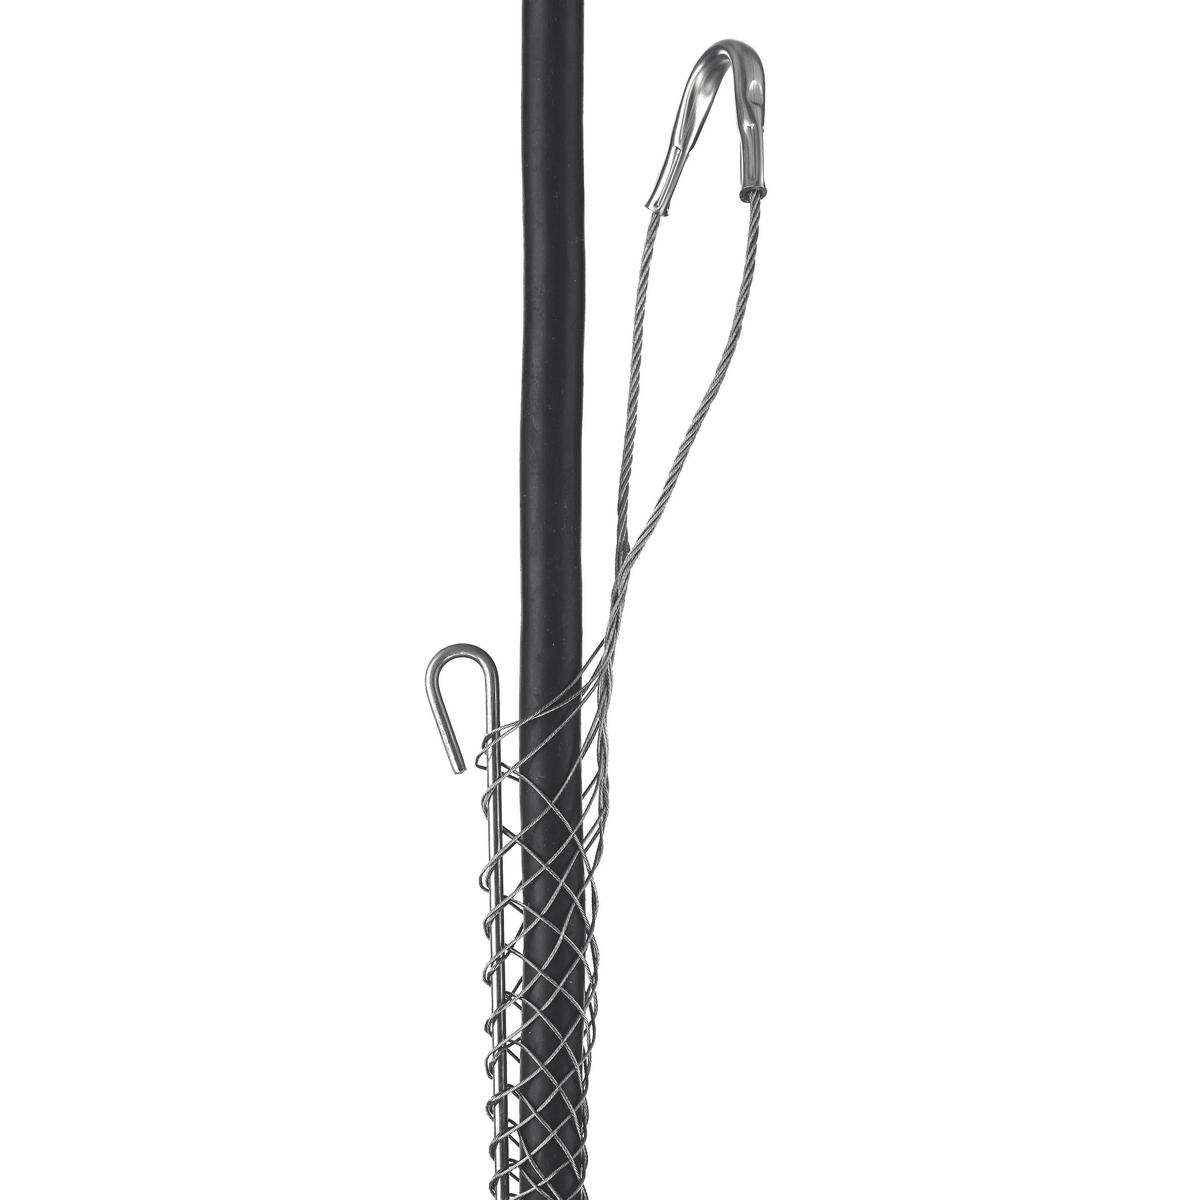 Hubbell 02403039 Support Grips, Offset Eye, Single Weave, Split Mesh, Rod Closing, Stainless Steel, 0.75-0.99"  ; Offset eye ; Strand equalizers position wires for equal loading throughout grip length ; Eye assemblies provide eye reinforcement at support hardware ; Split 